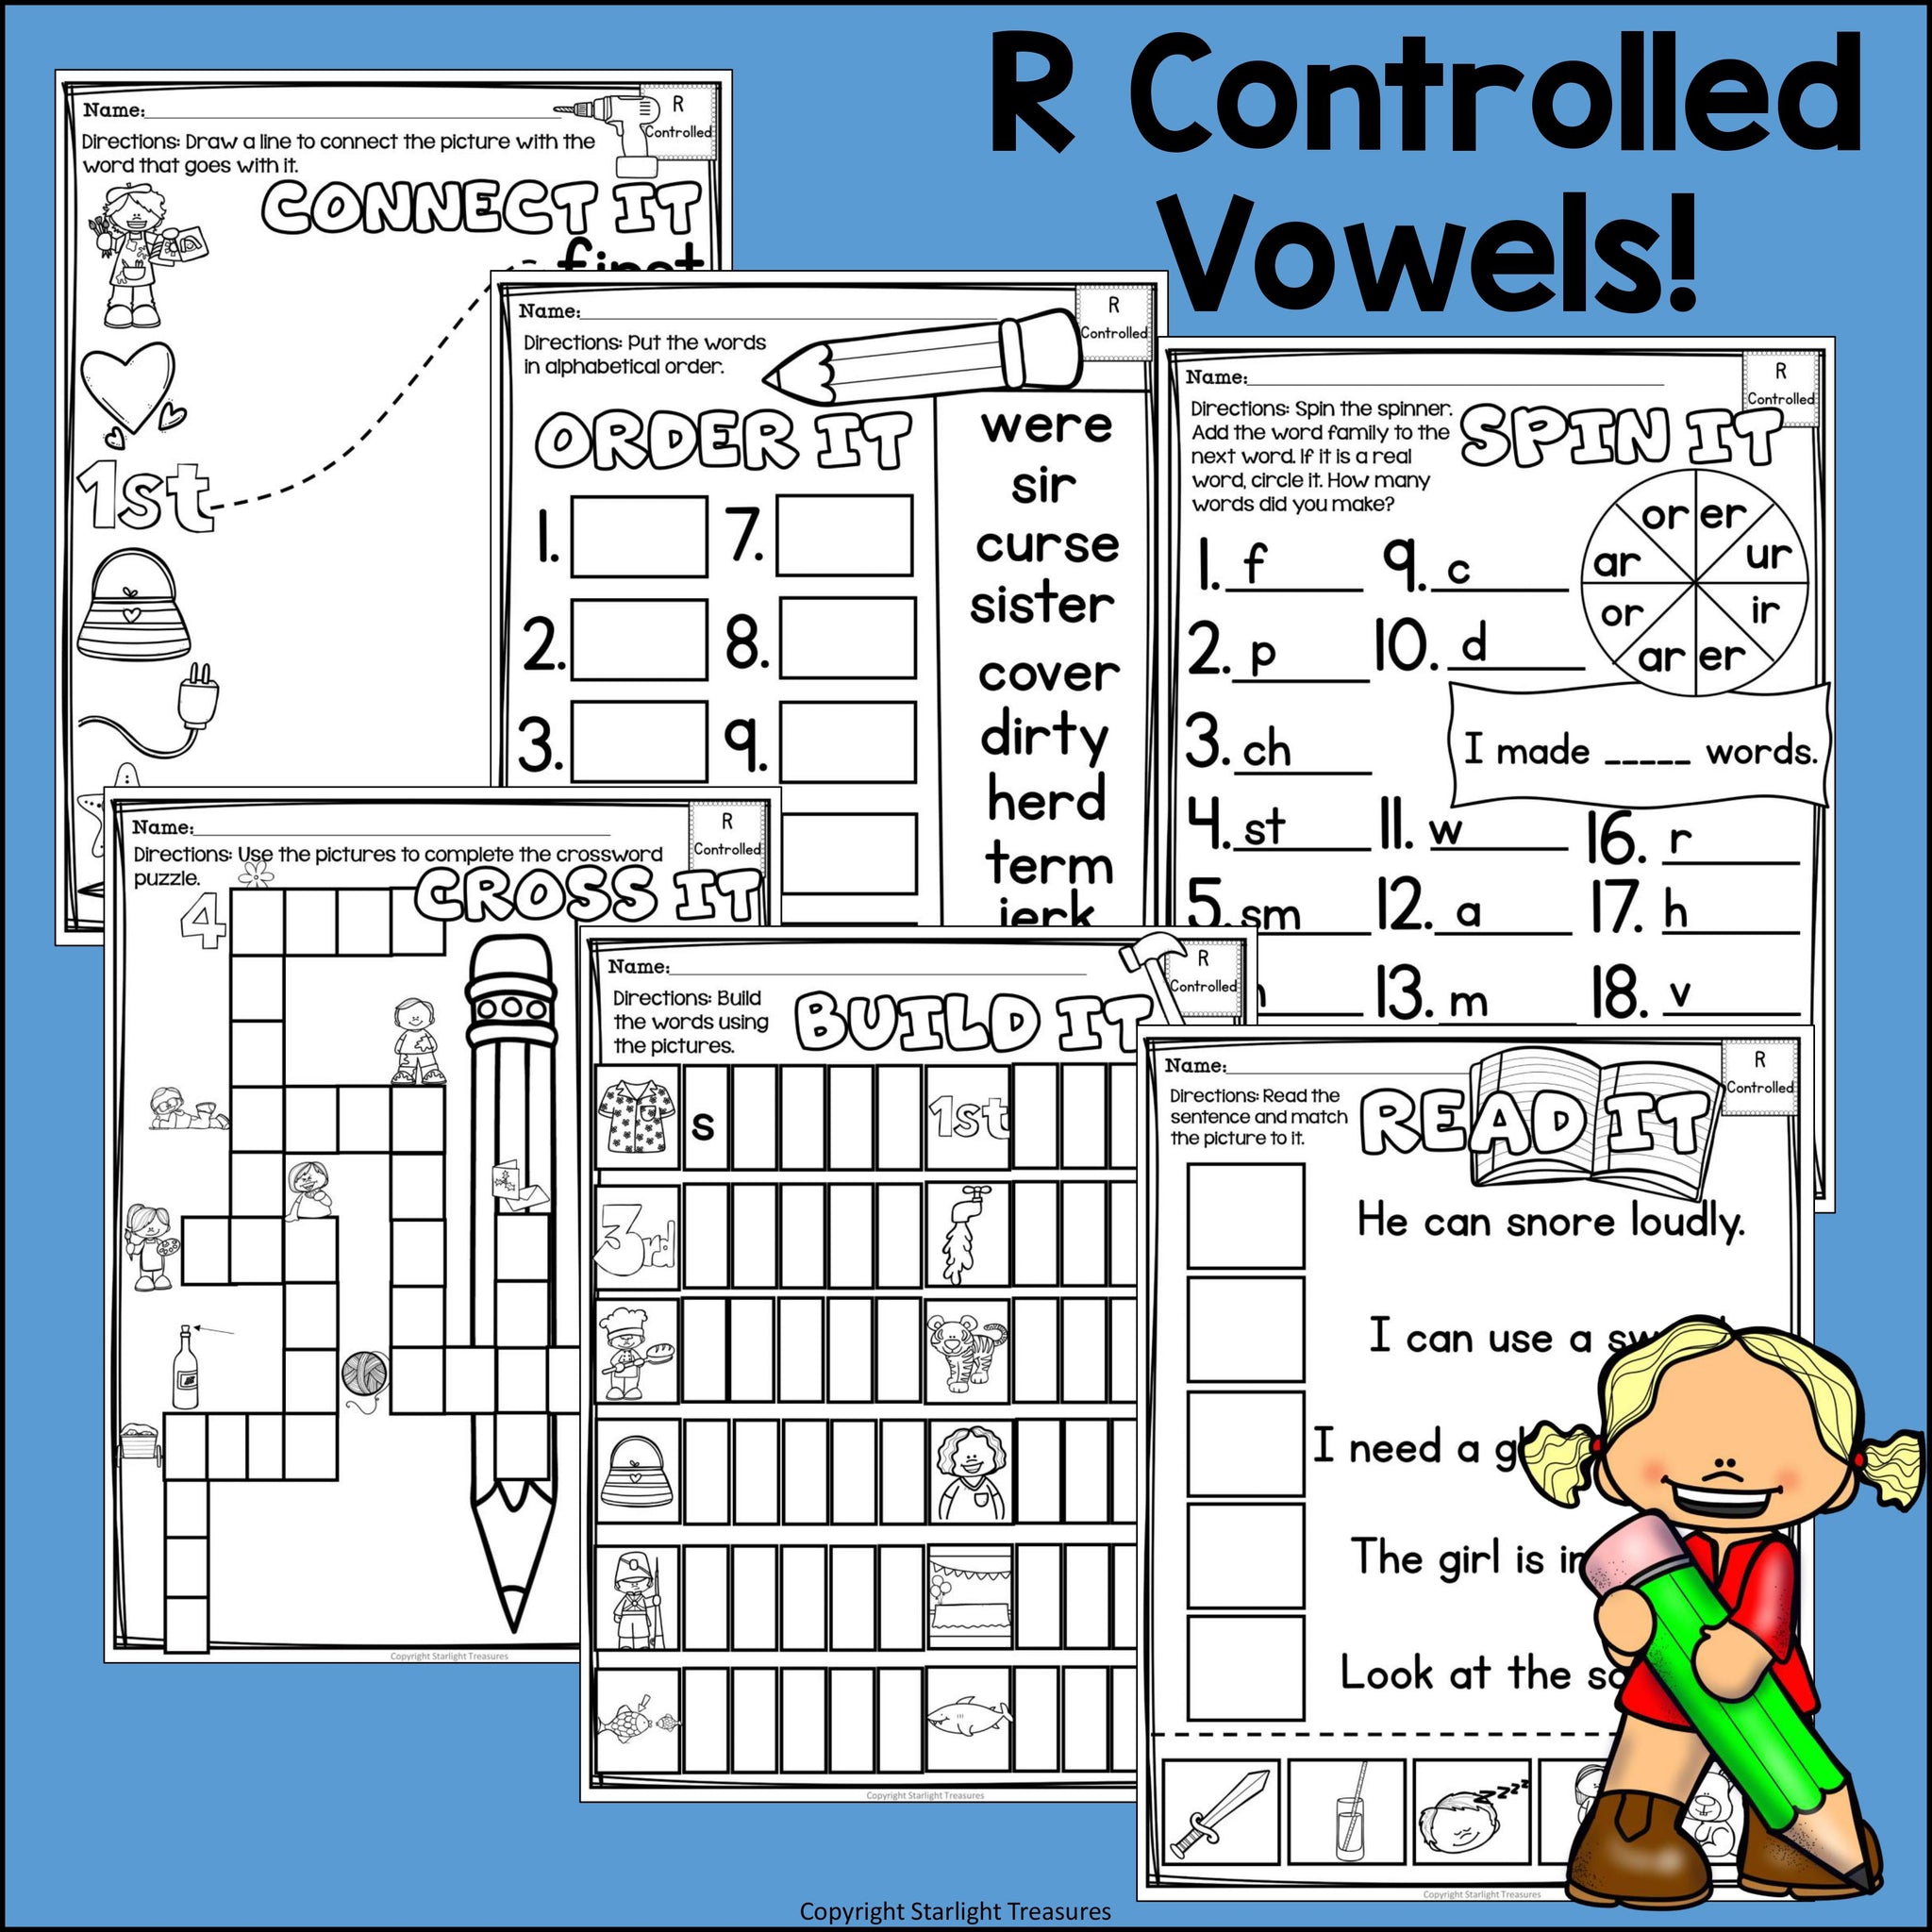 r-controlled-vowels-worksheets-and-activities-for-early-readers-phon